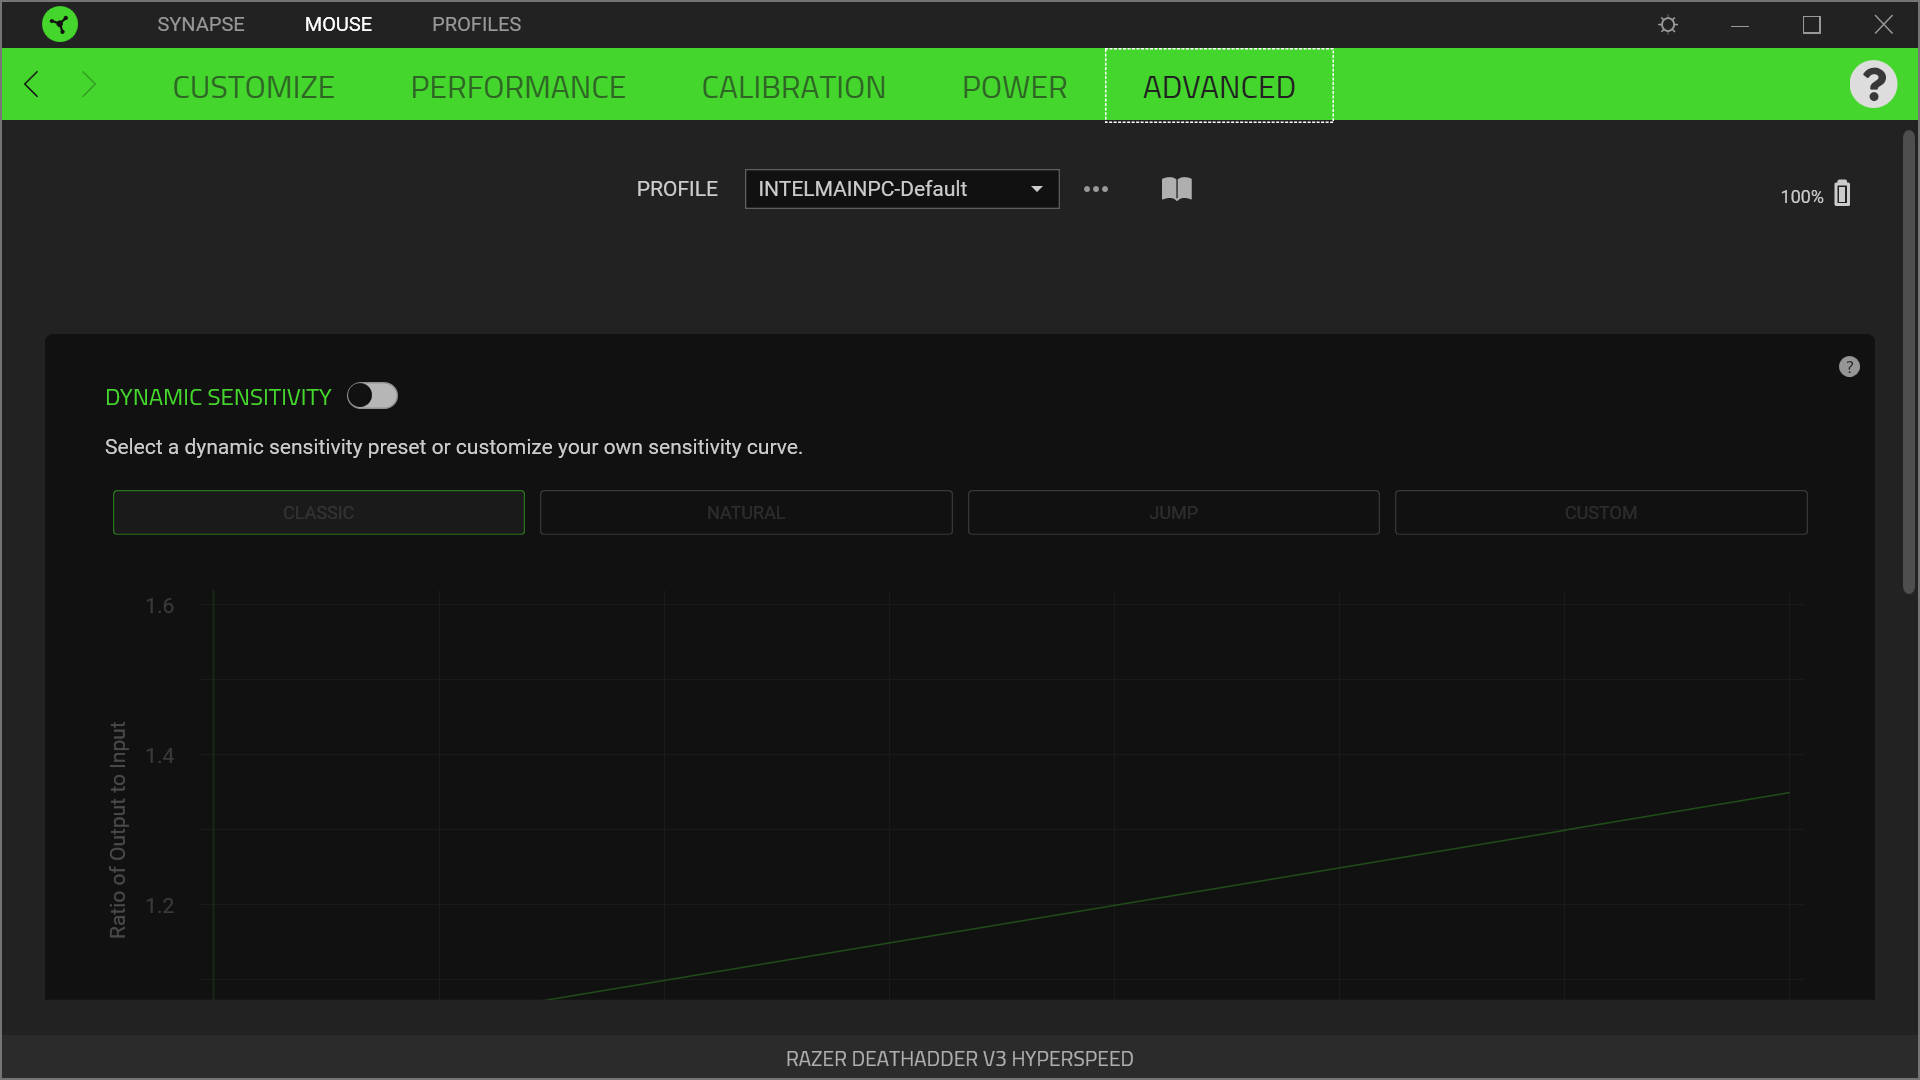 Screenshots of Razer's Synapse application, showing the configuration options for the DeathAdder V3 HyperSpeed